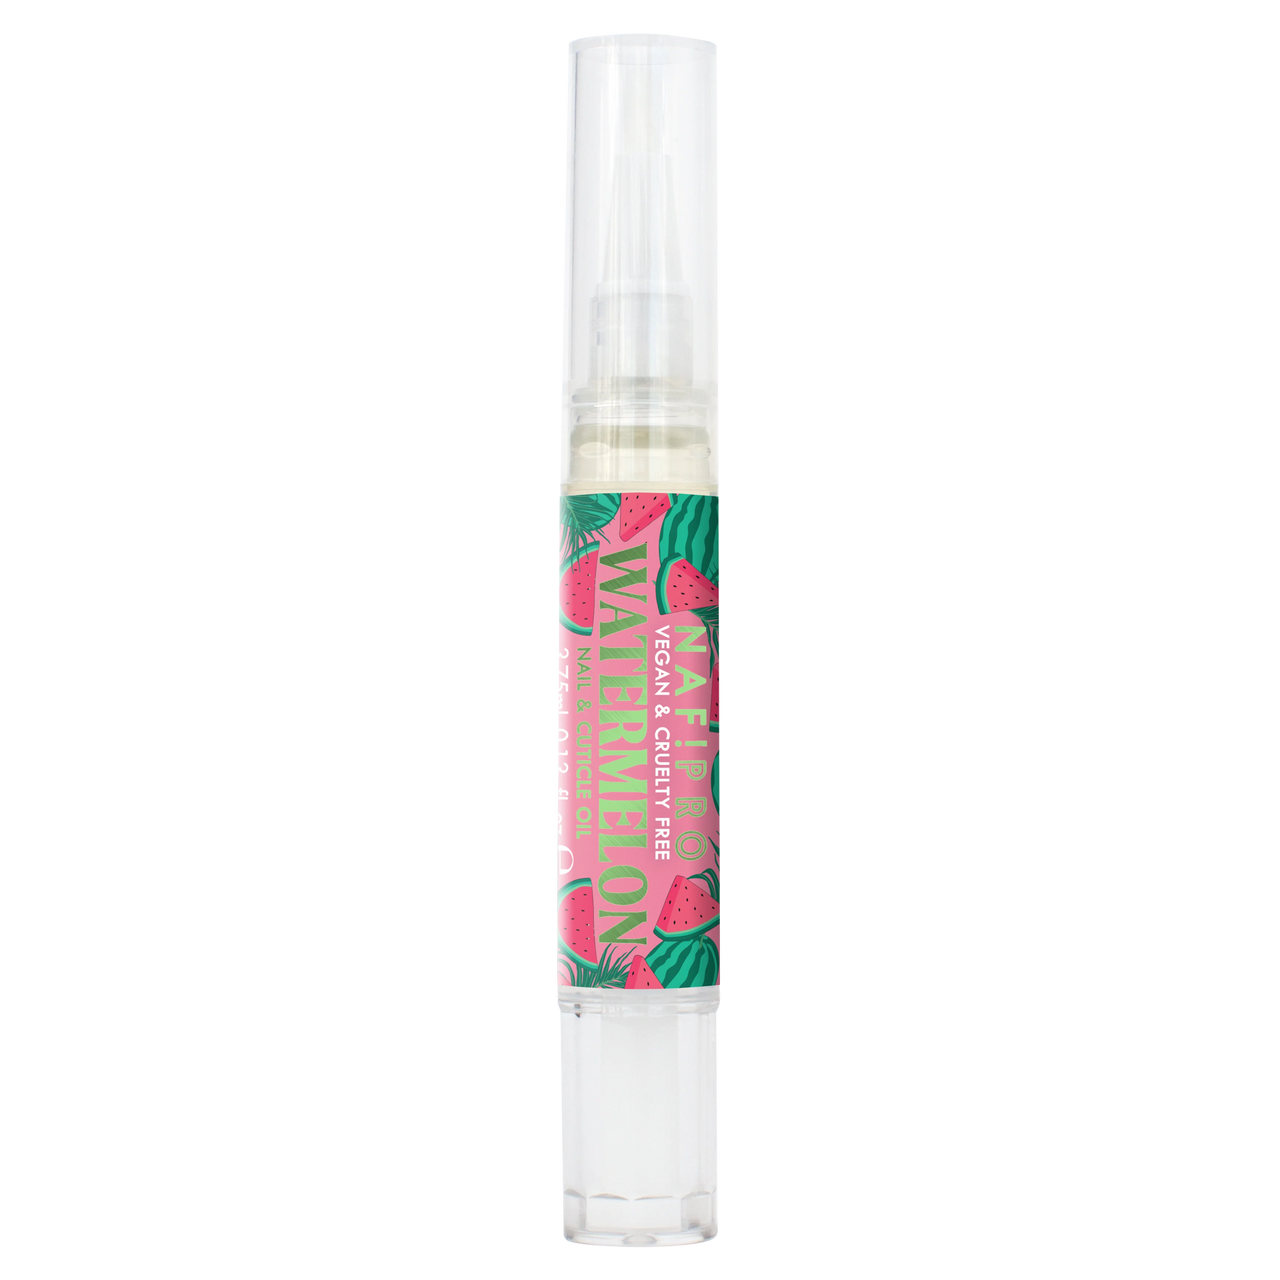 Naf! Pro Watermelon nail and cuticle oil